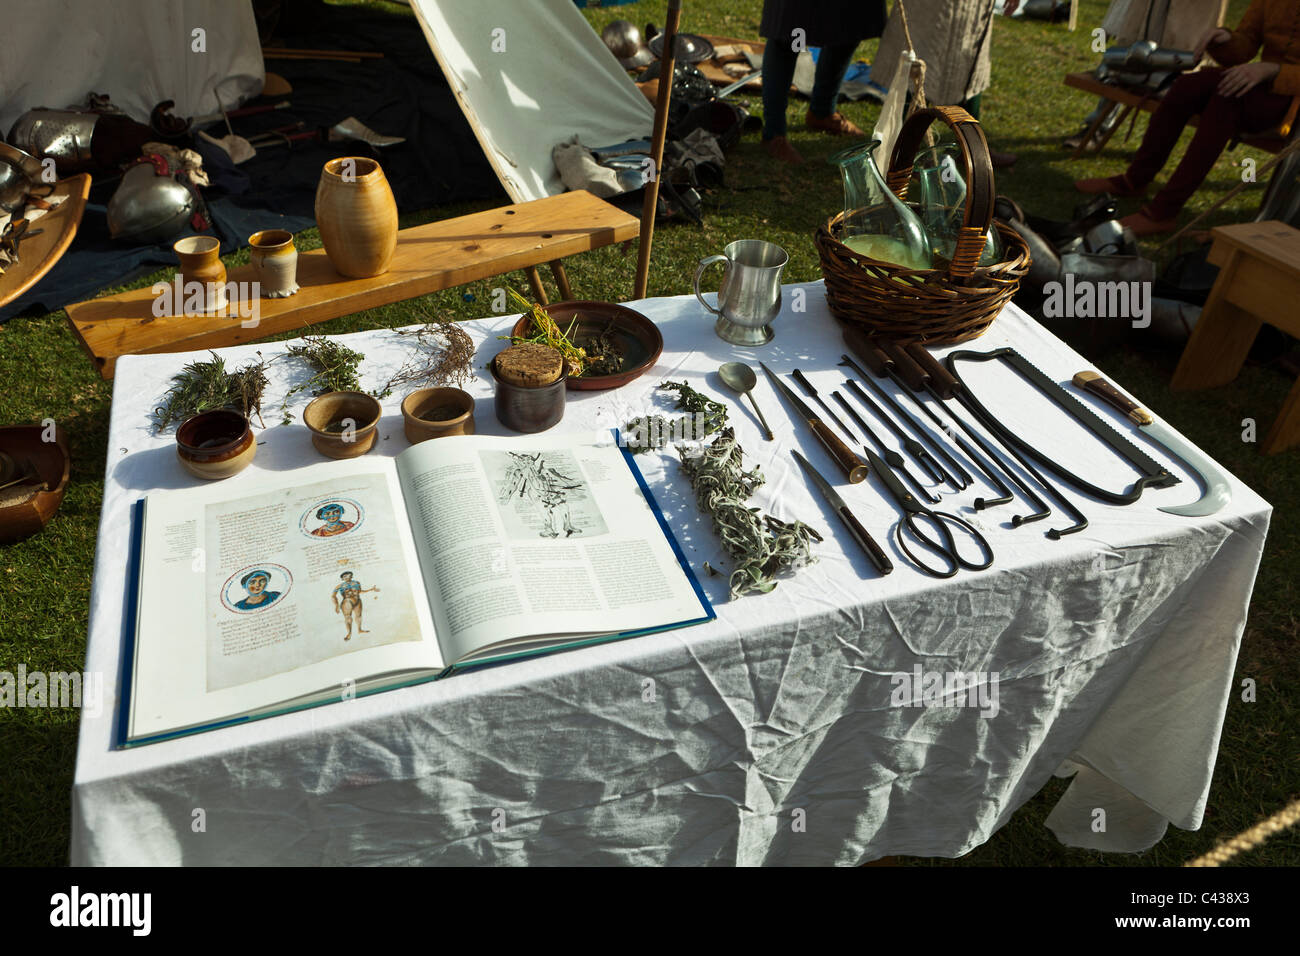 Old surgical instruments and a medical book on display at a medieval fair. Stock Photo